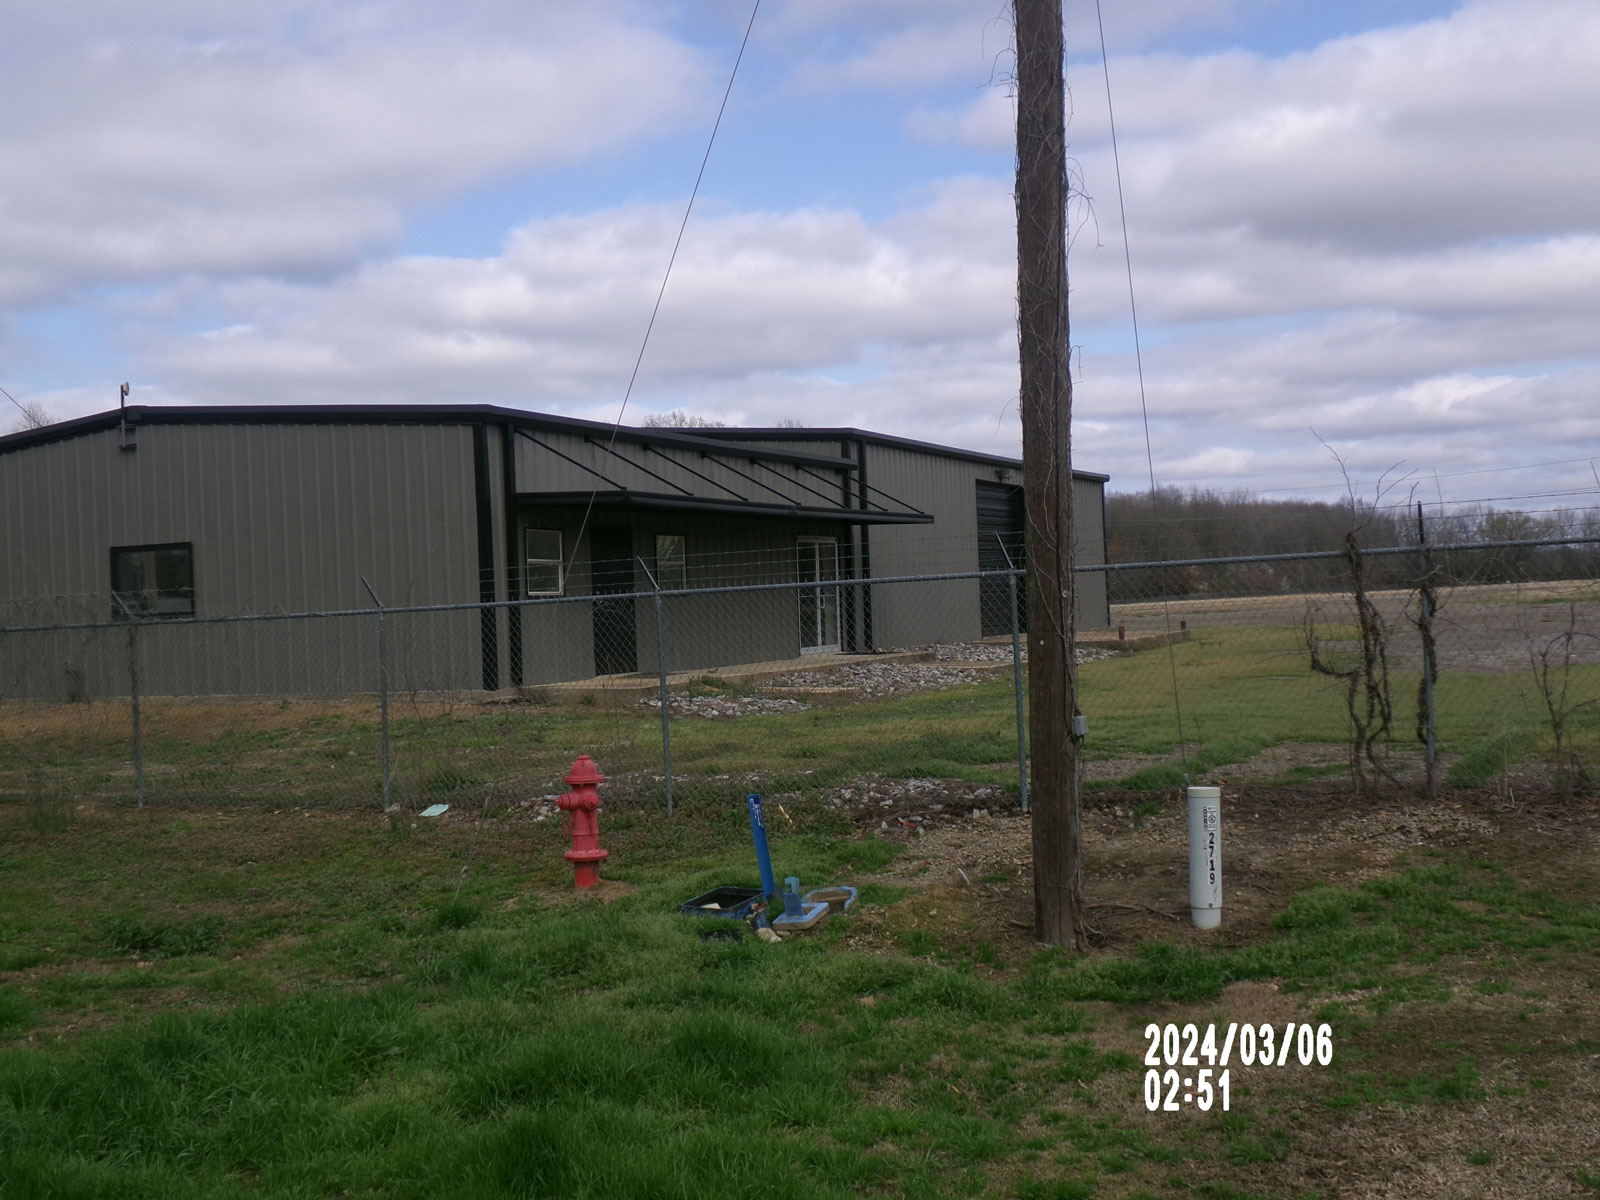 Commercial building with shop 60’x170’x14’
Red iron frame
26 gauge roof
26 gauge walls
Gutters and downspouts

Henryetta Oklahoma approx  location
3-12’x12’ roll up door
3” roof and wall insulation insulation
5-3070 steel walk doors